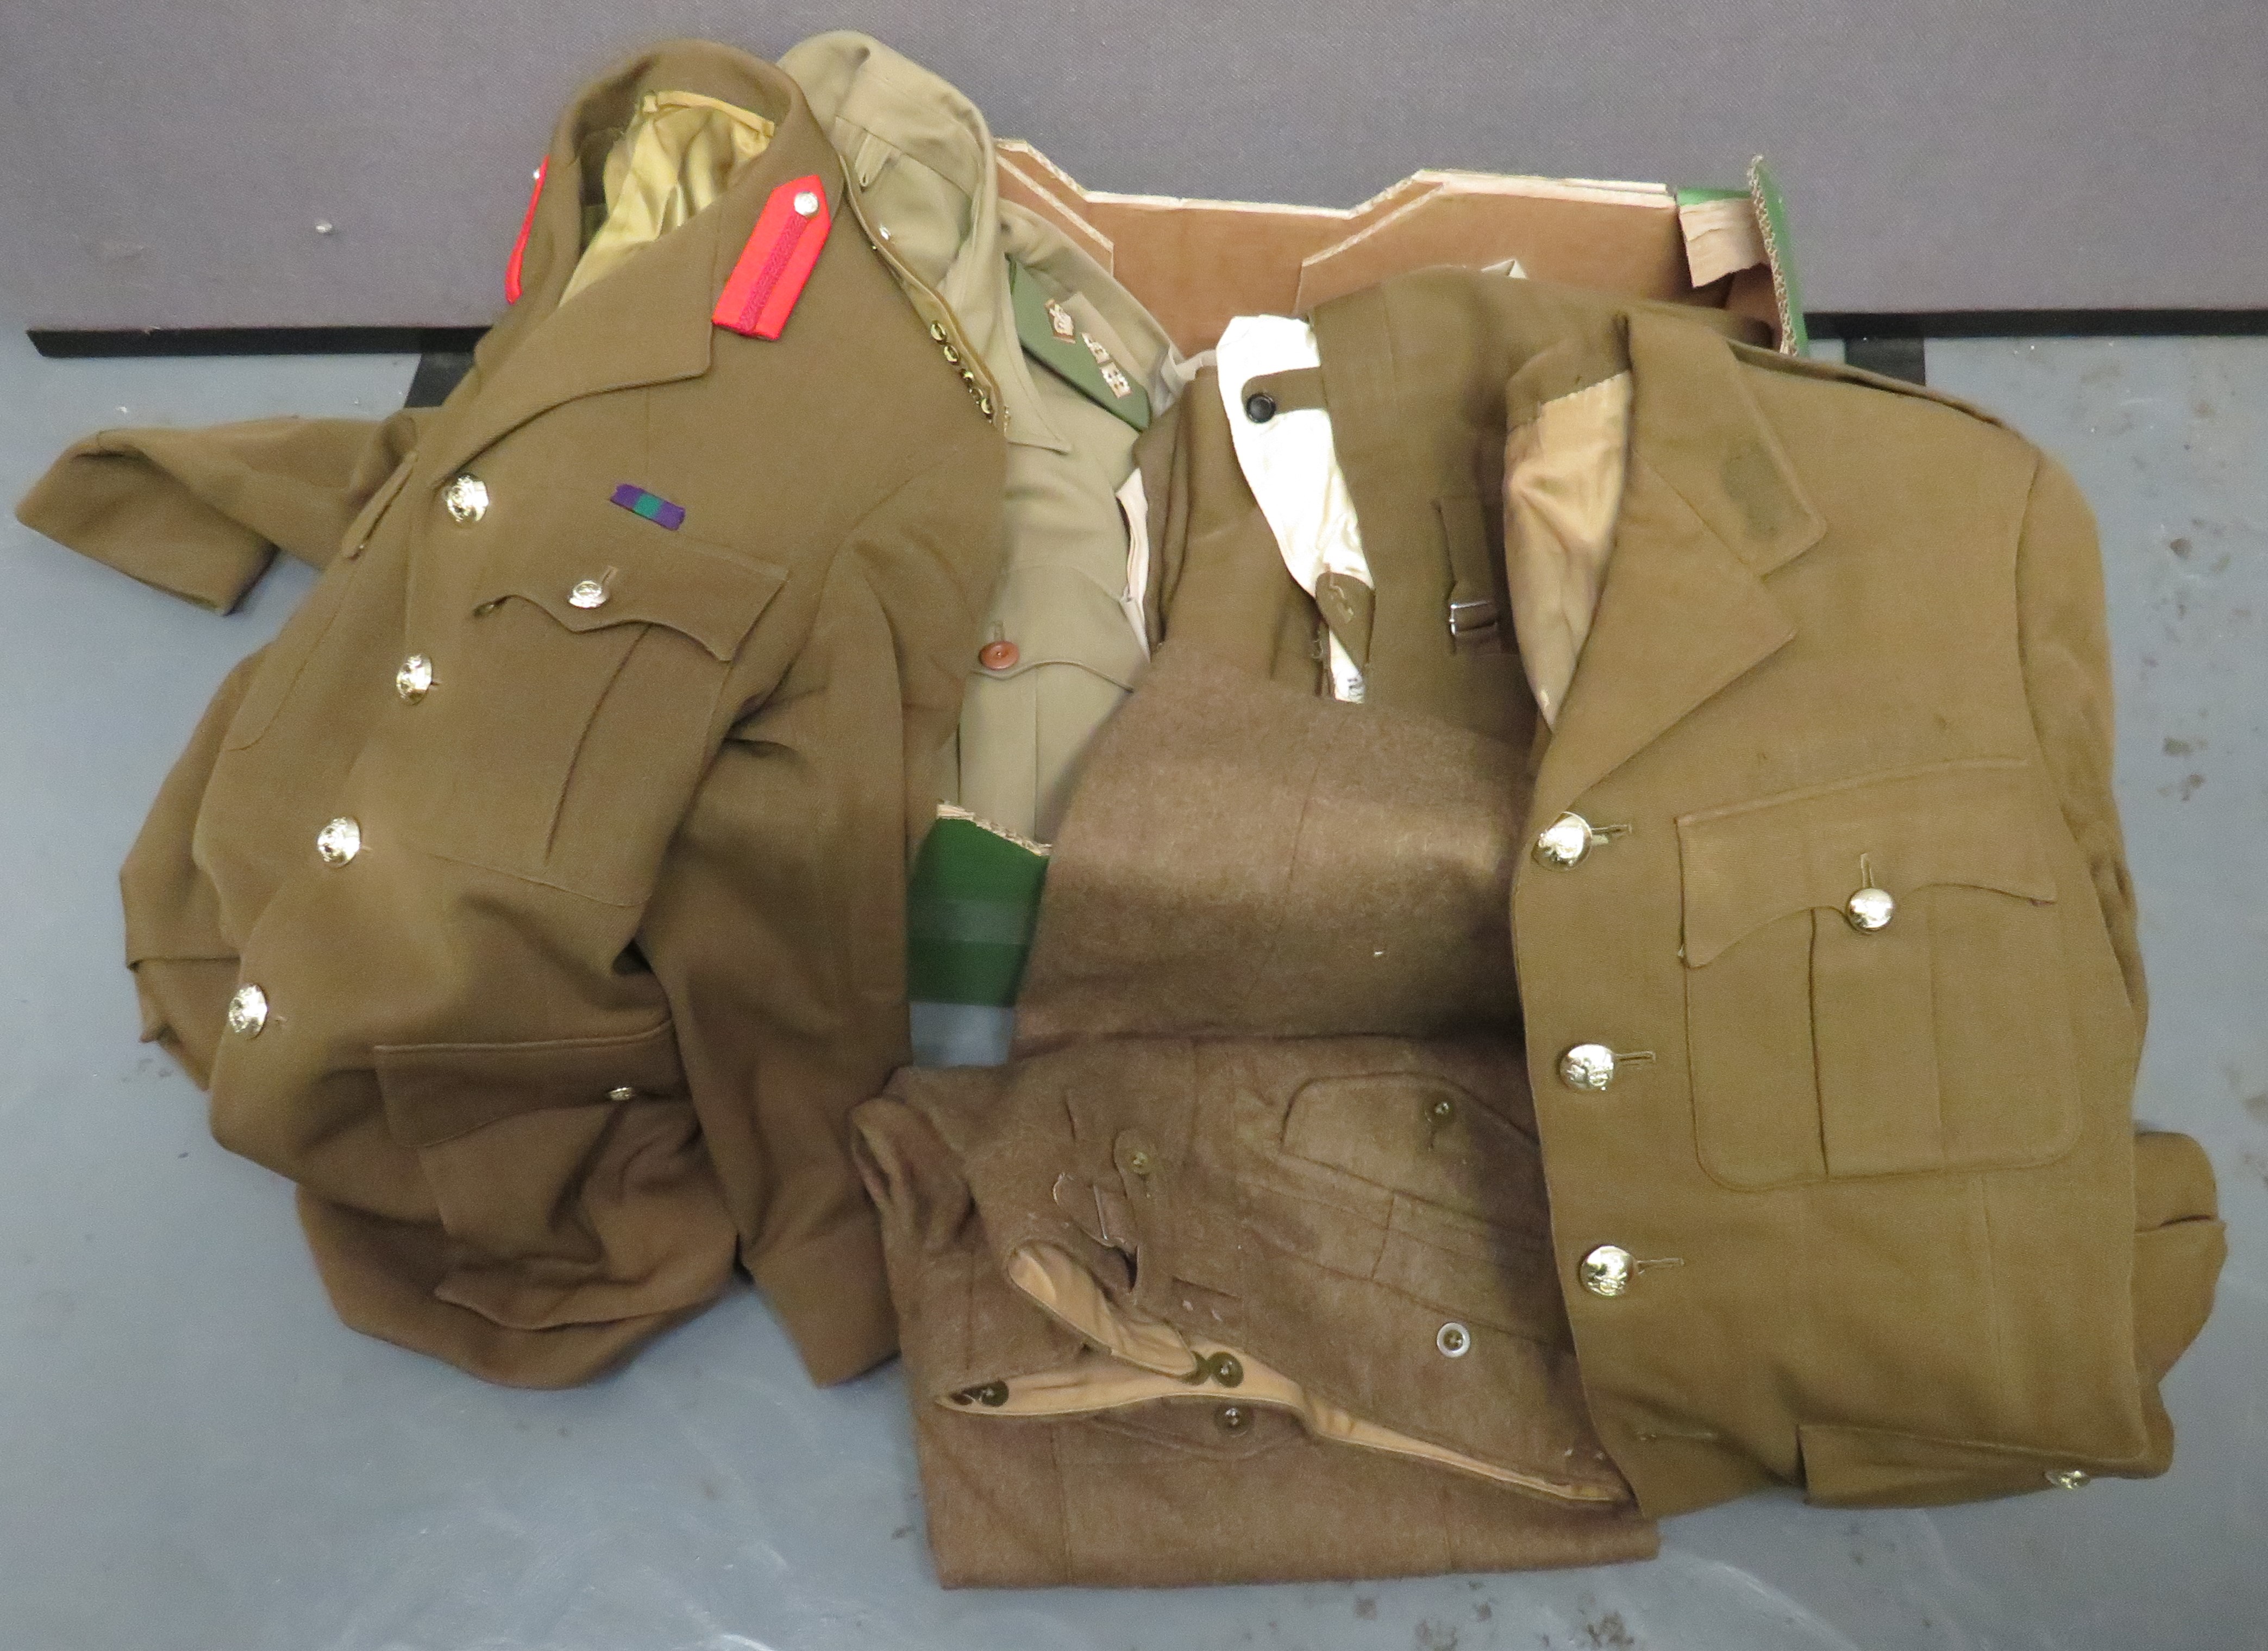 Selection Of Post War Military Uniforms including Royal Artillery Officer's service dress and